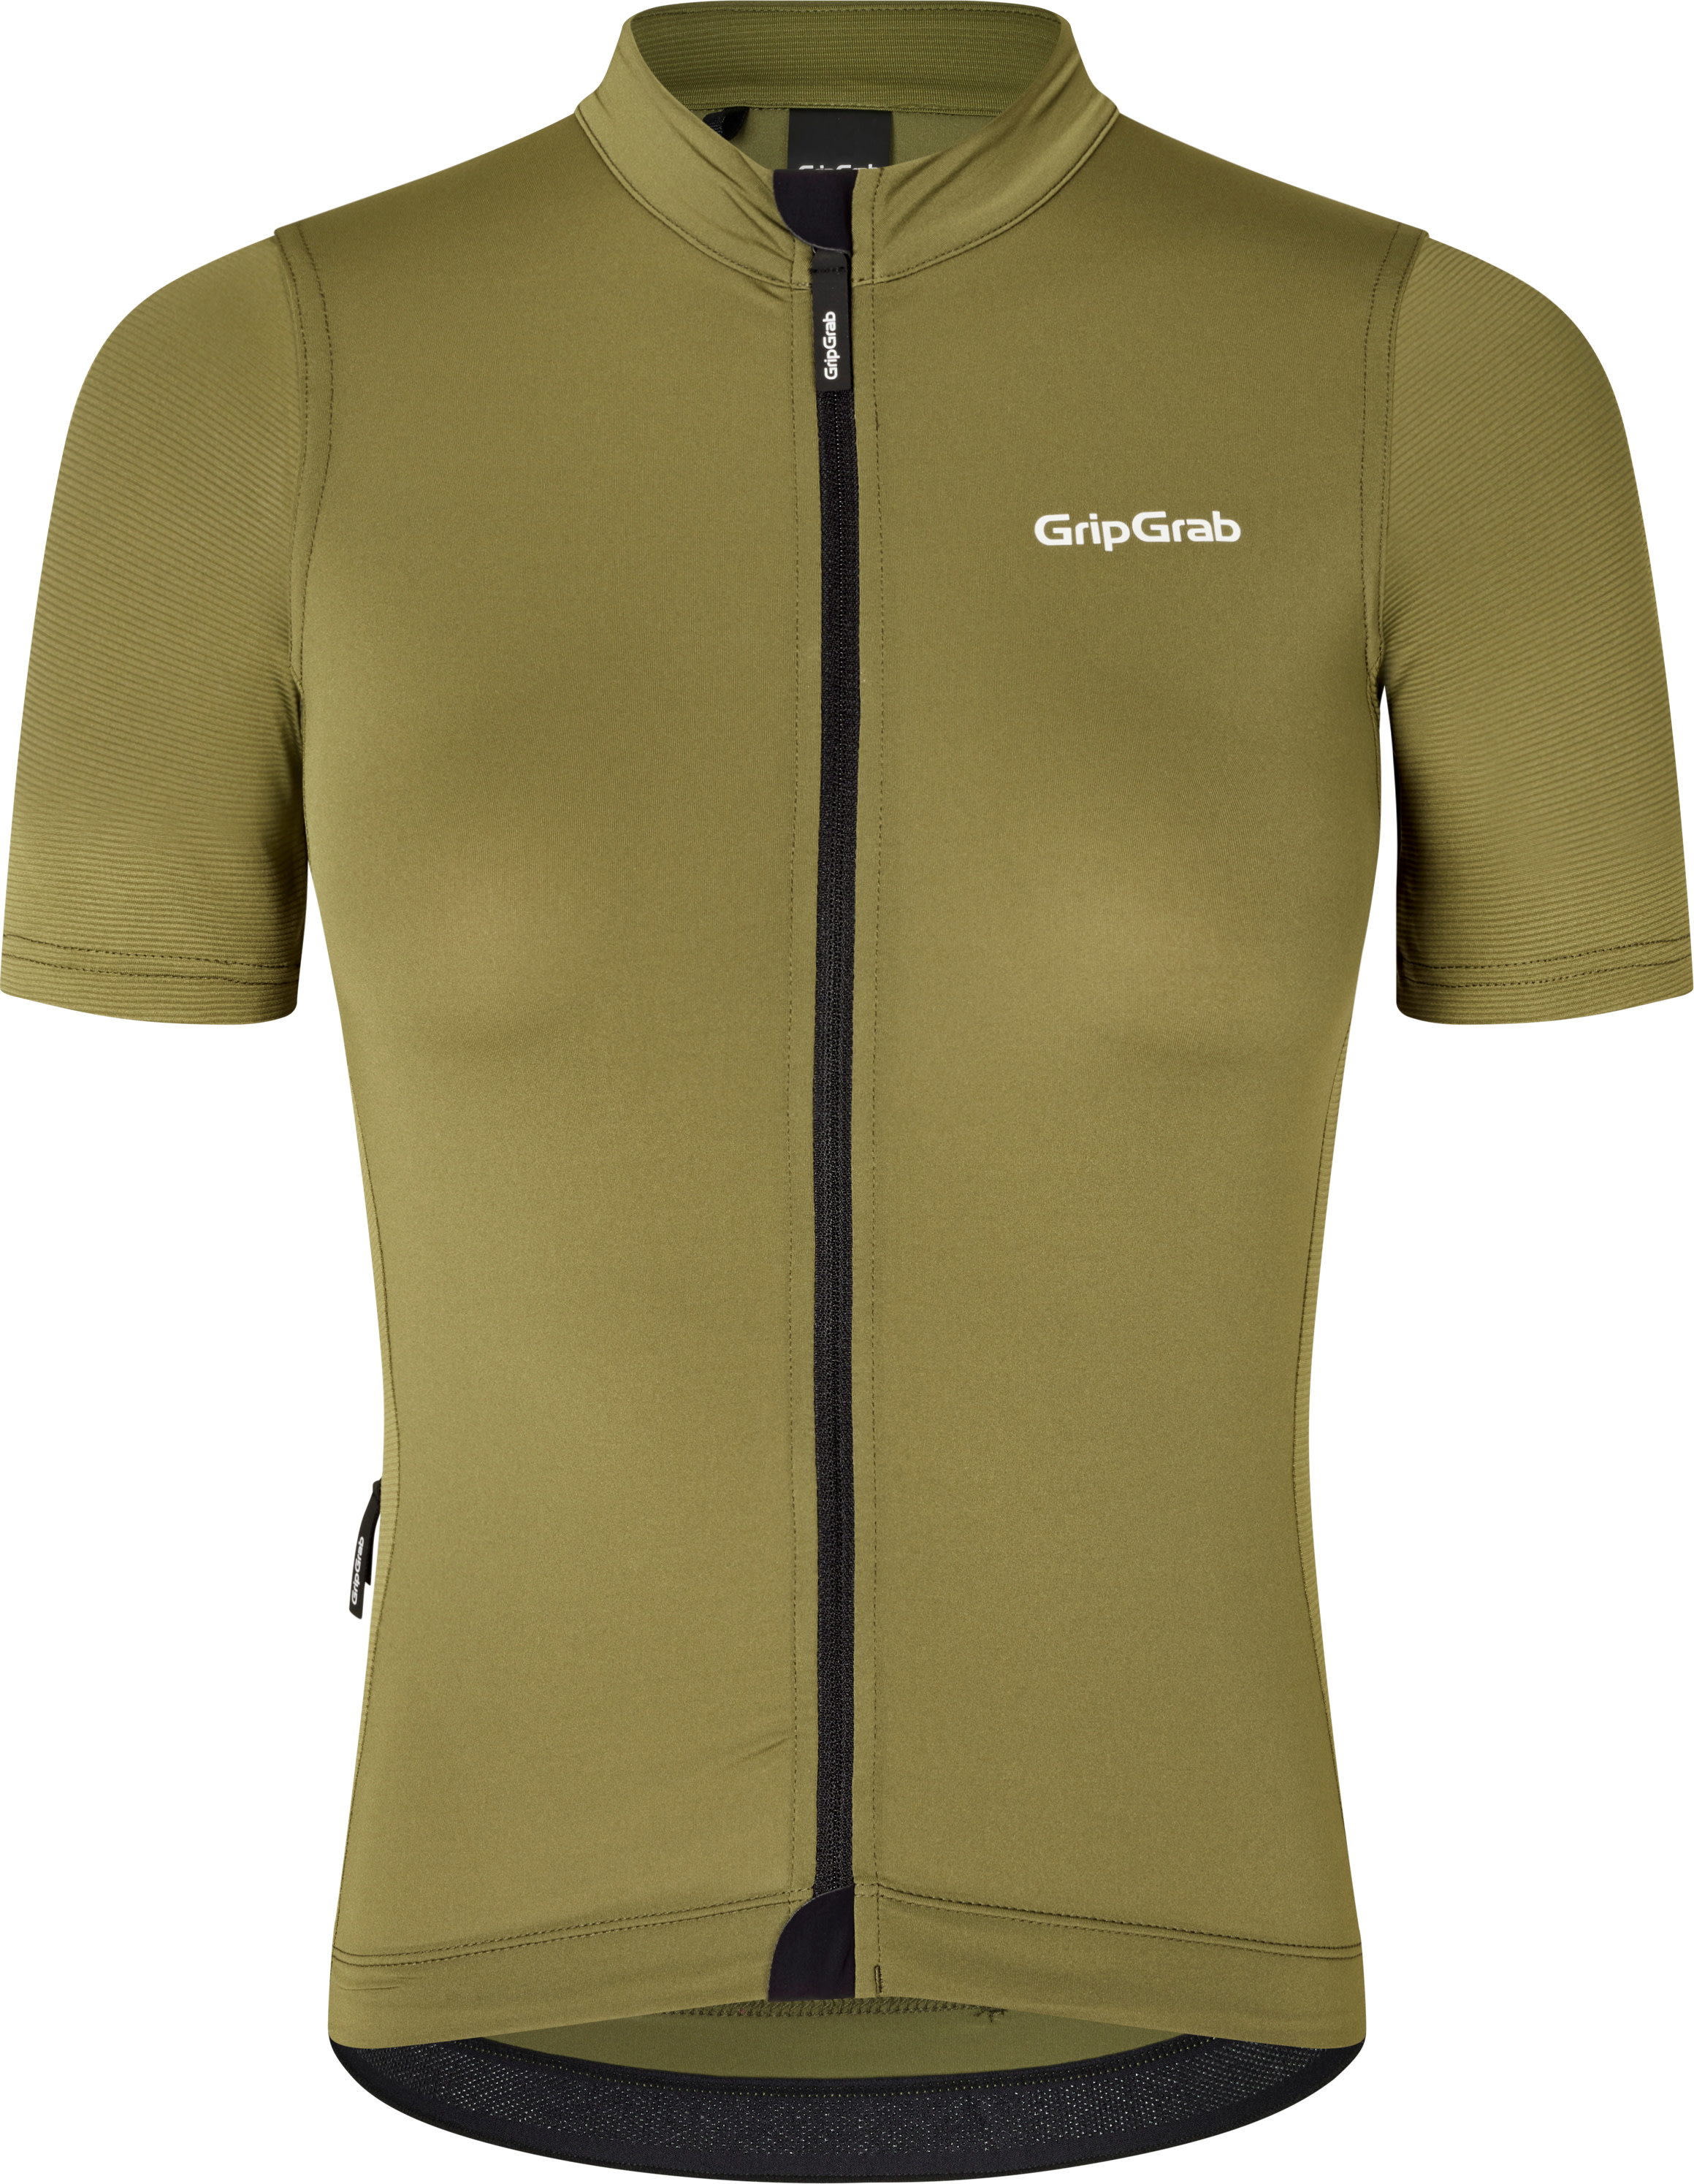 Gripgrab Women’s Ride Short Sleeve Jersey Olive Green